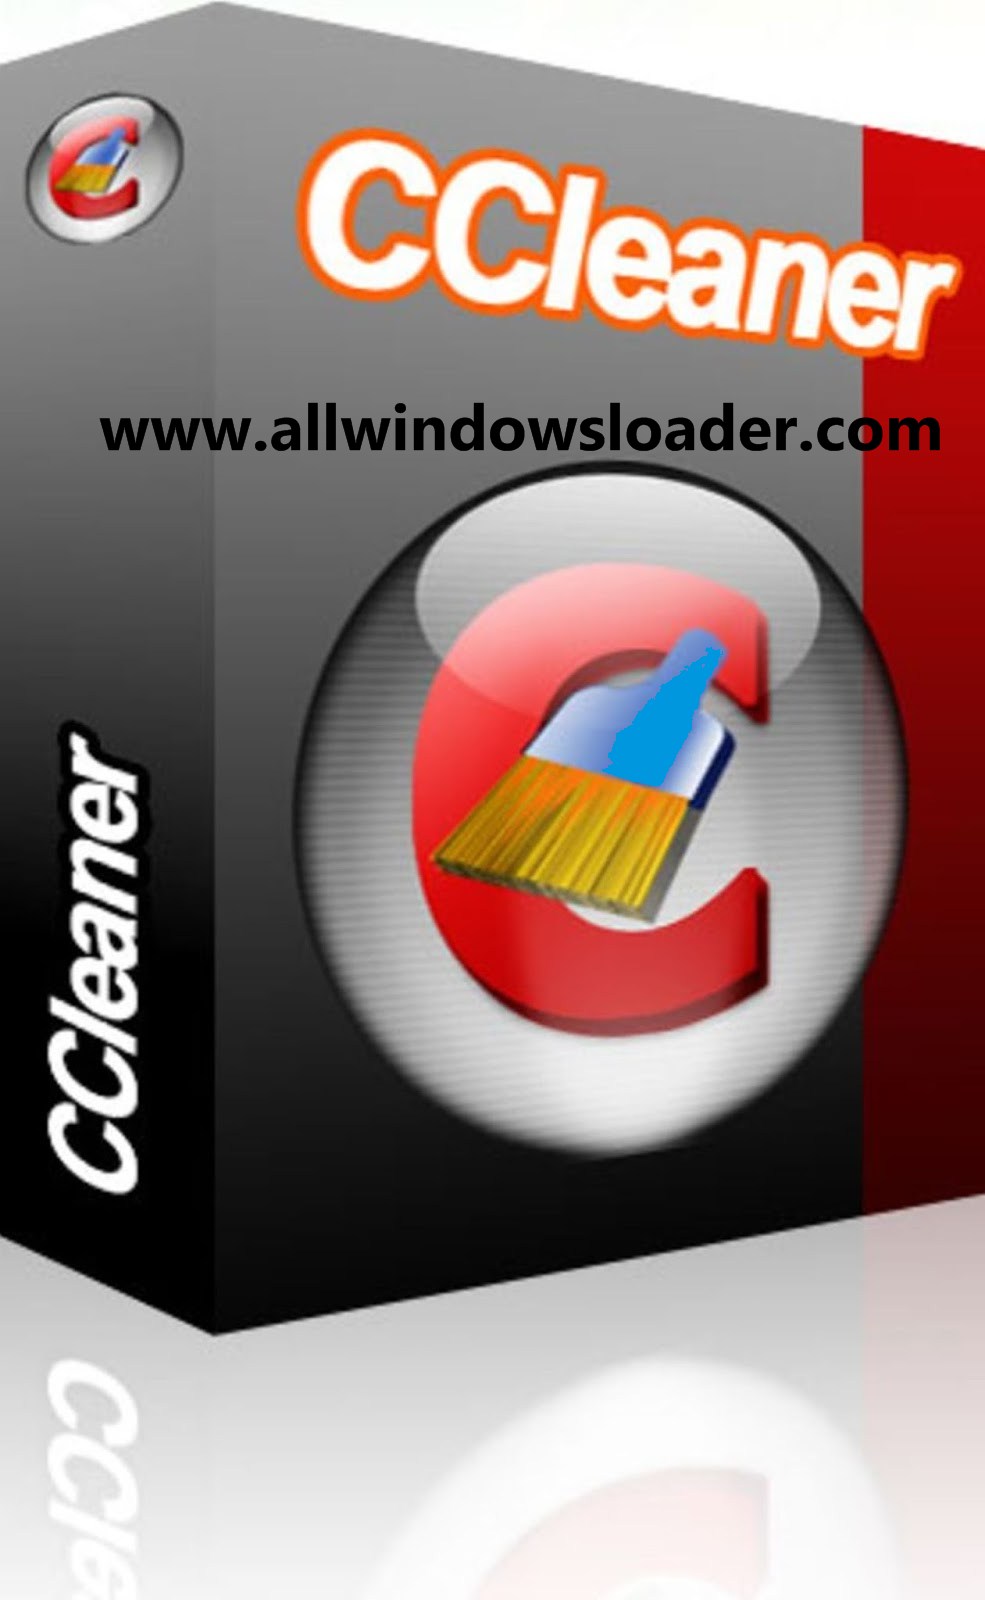 what is the latest free version of ccleaner for mac